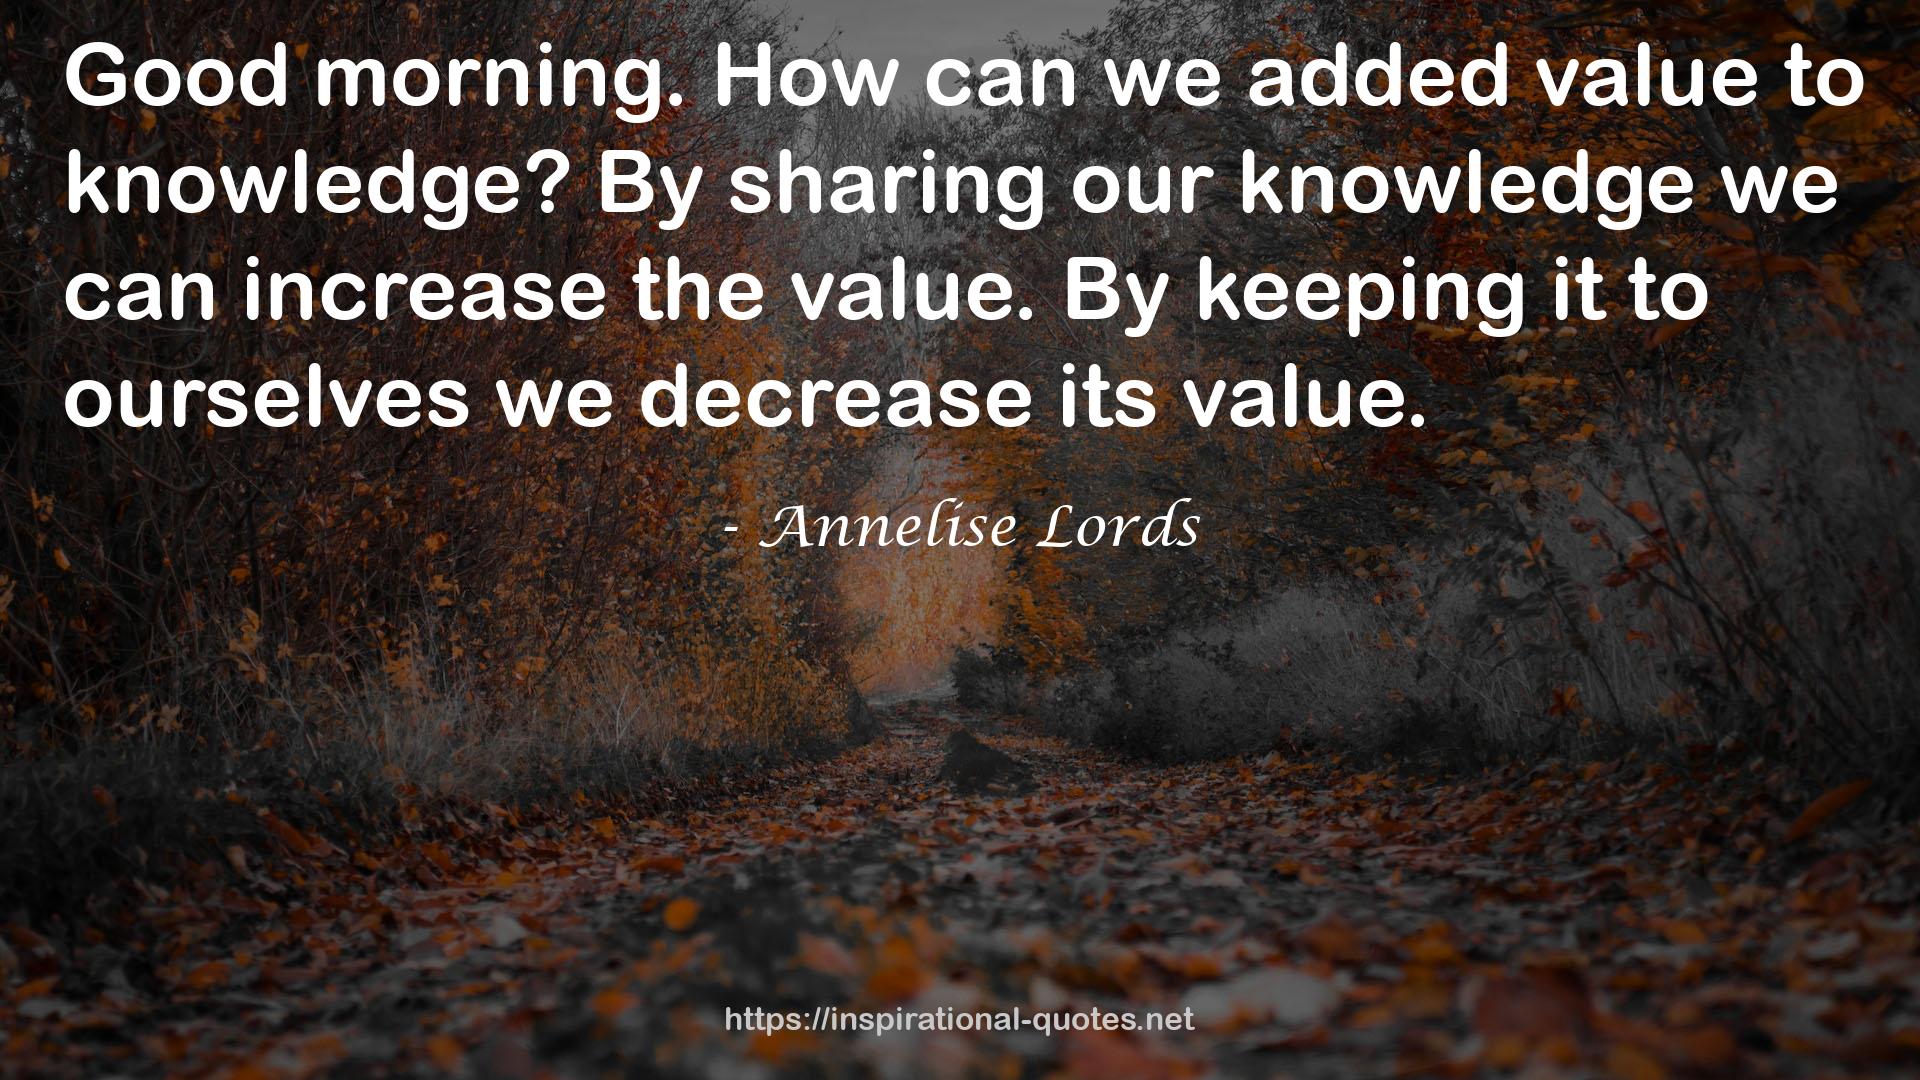 Annelise Lords QUOTES